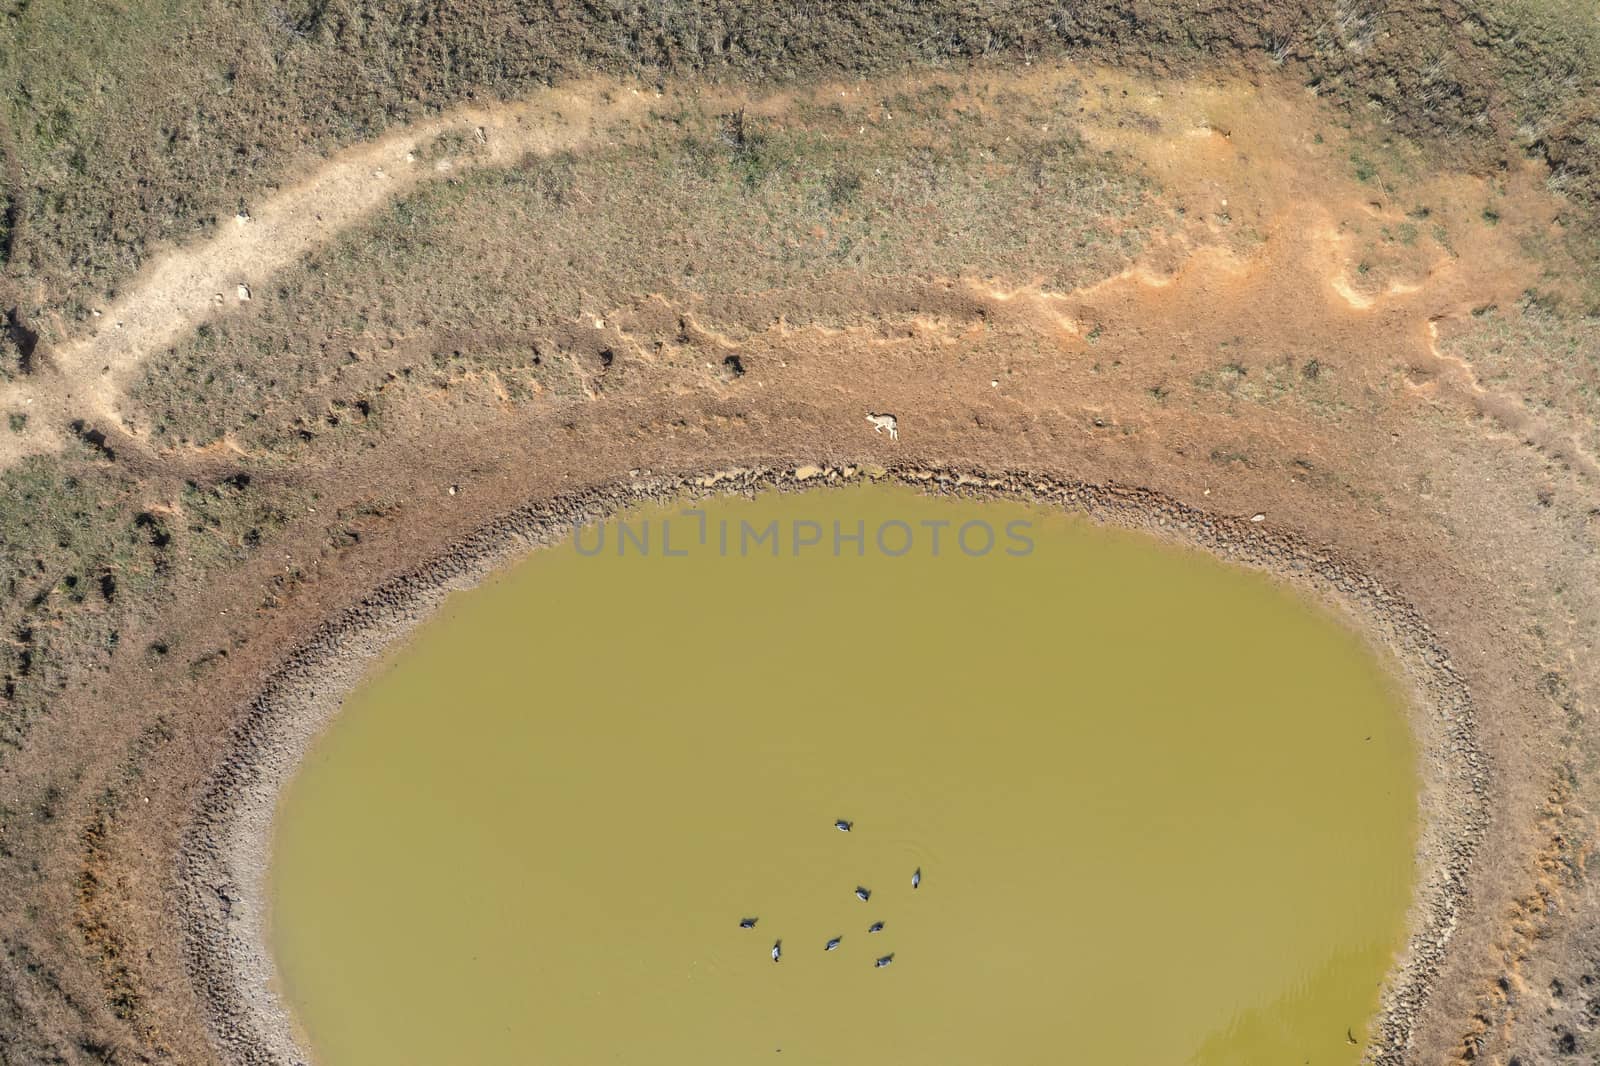 Ducks swimming in a dry agricultural irrigation dam in regional Australia